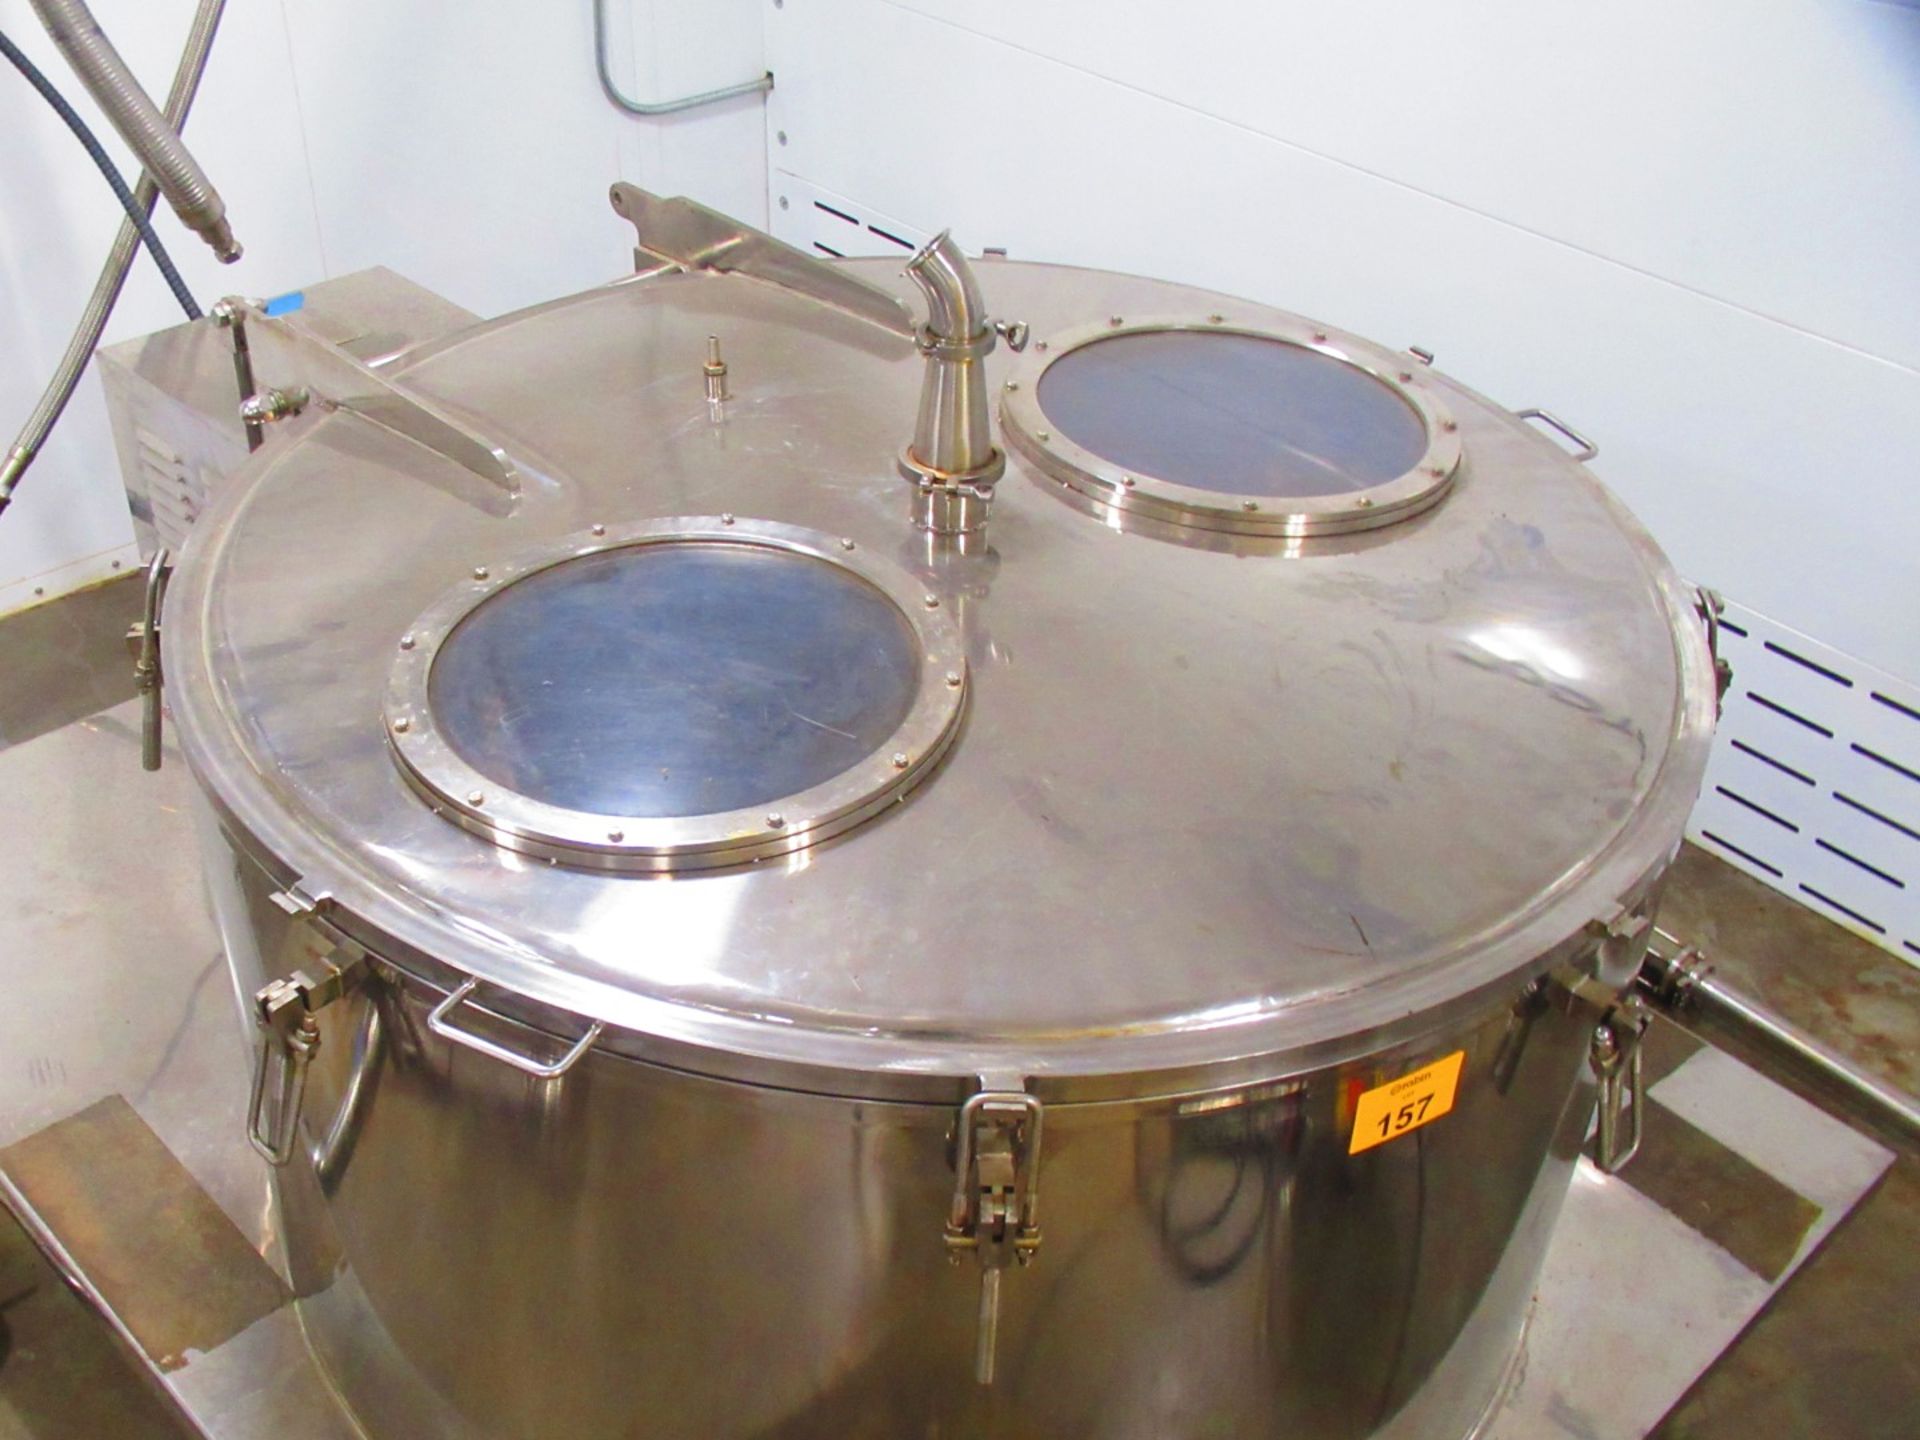 Manual Top Discharge Centrifuge - Image 7 of 8